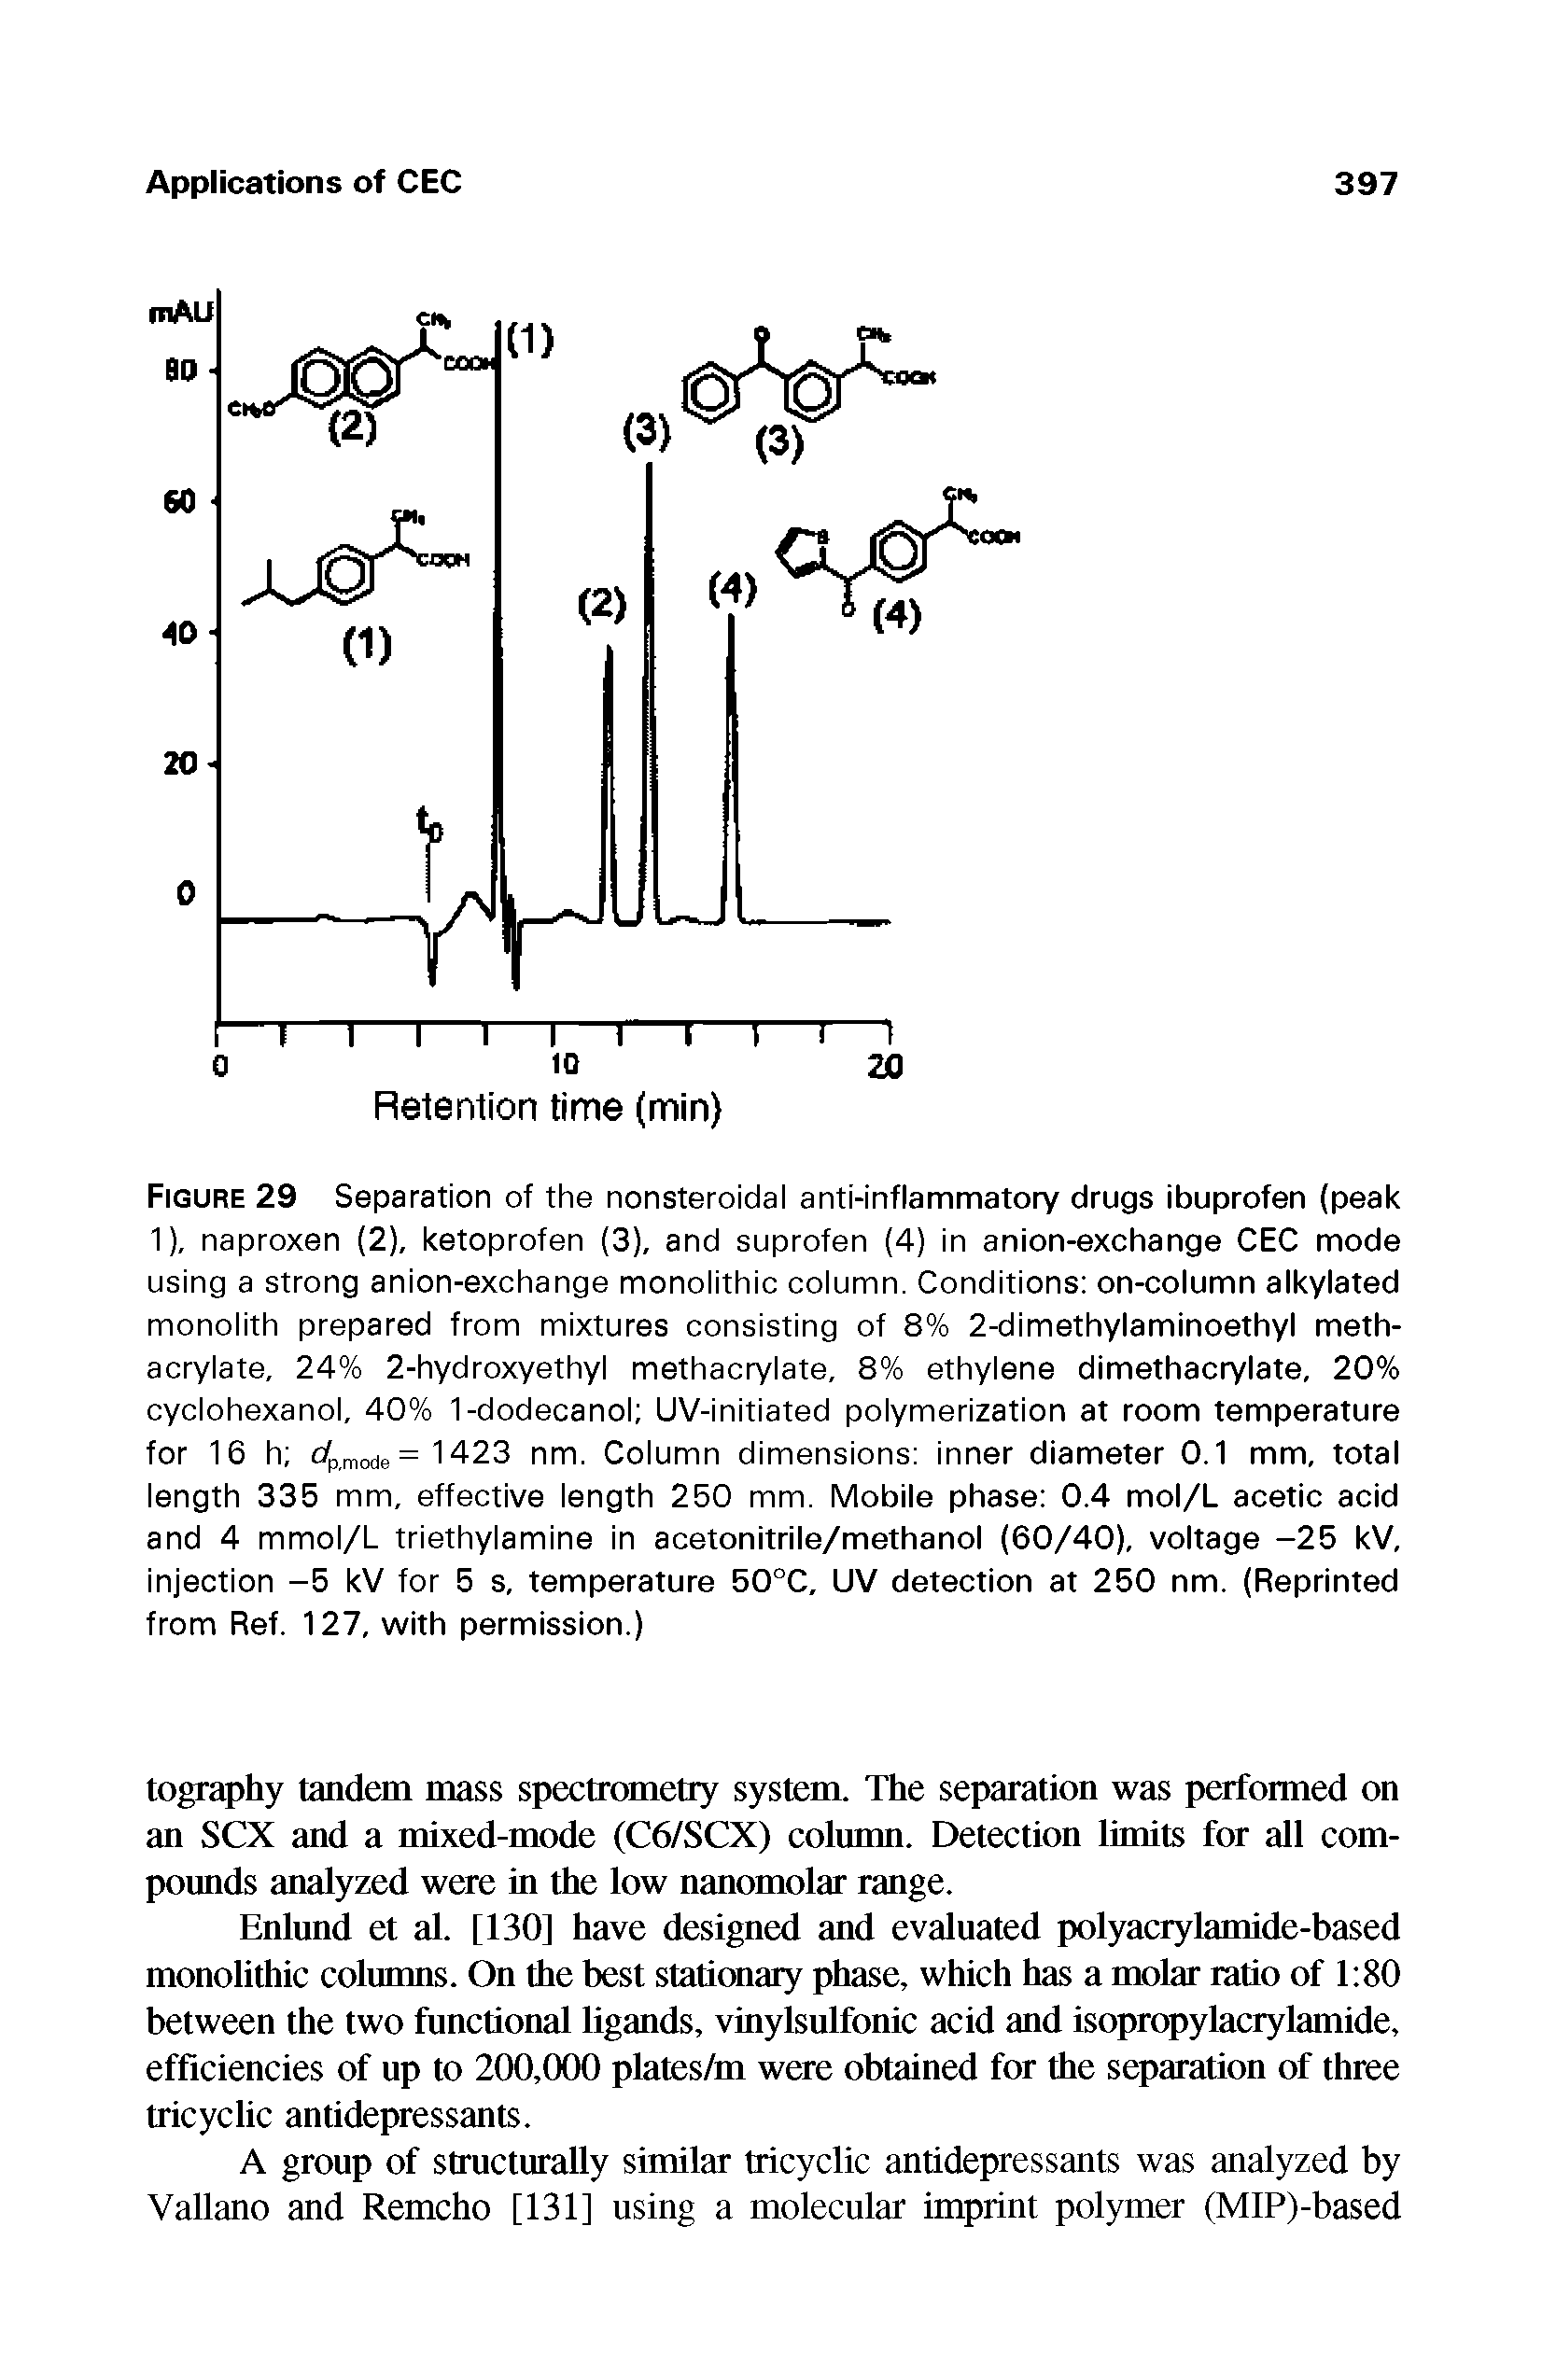 Figure 29 Separation of the nonsteroidal anti-inflammatory drugs ibuprofen (peak 1), naproxen (2), ketoprofen (3), and suprofen (4) in anion-exchange CEC mode using a strong anion-exchange monolithic column. Conditions on-column alkylated monolith prepared from mixtures consisting of 8% 2-dimethylaminoethyl methacrylate, 24% 2-hydroxyethyl methacrylate, 8% ethylene dimethacrylate, 20% cyclohexanol, 40% 1-dodecanol UV-initiated polymerization at room temperature for 16 h cfpmode= 1423 nm. Column dimensions inner diameter 0.1 mm, total length 335 mm, effective length 250 mm. Mobile phase 0.4 mol/L acetic acid and 4 mmol/L triethylamine in acetonitrile/methanol (60/40), voltage -25 kV, injection -5 kV for 5 s, temperature 50°C, UV detection at 250 nm. (Reprinted from Ref. 127, with permission.)...